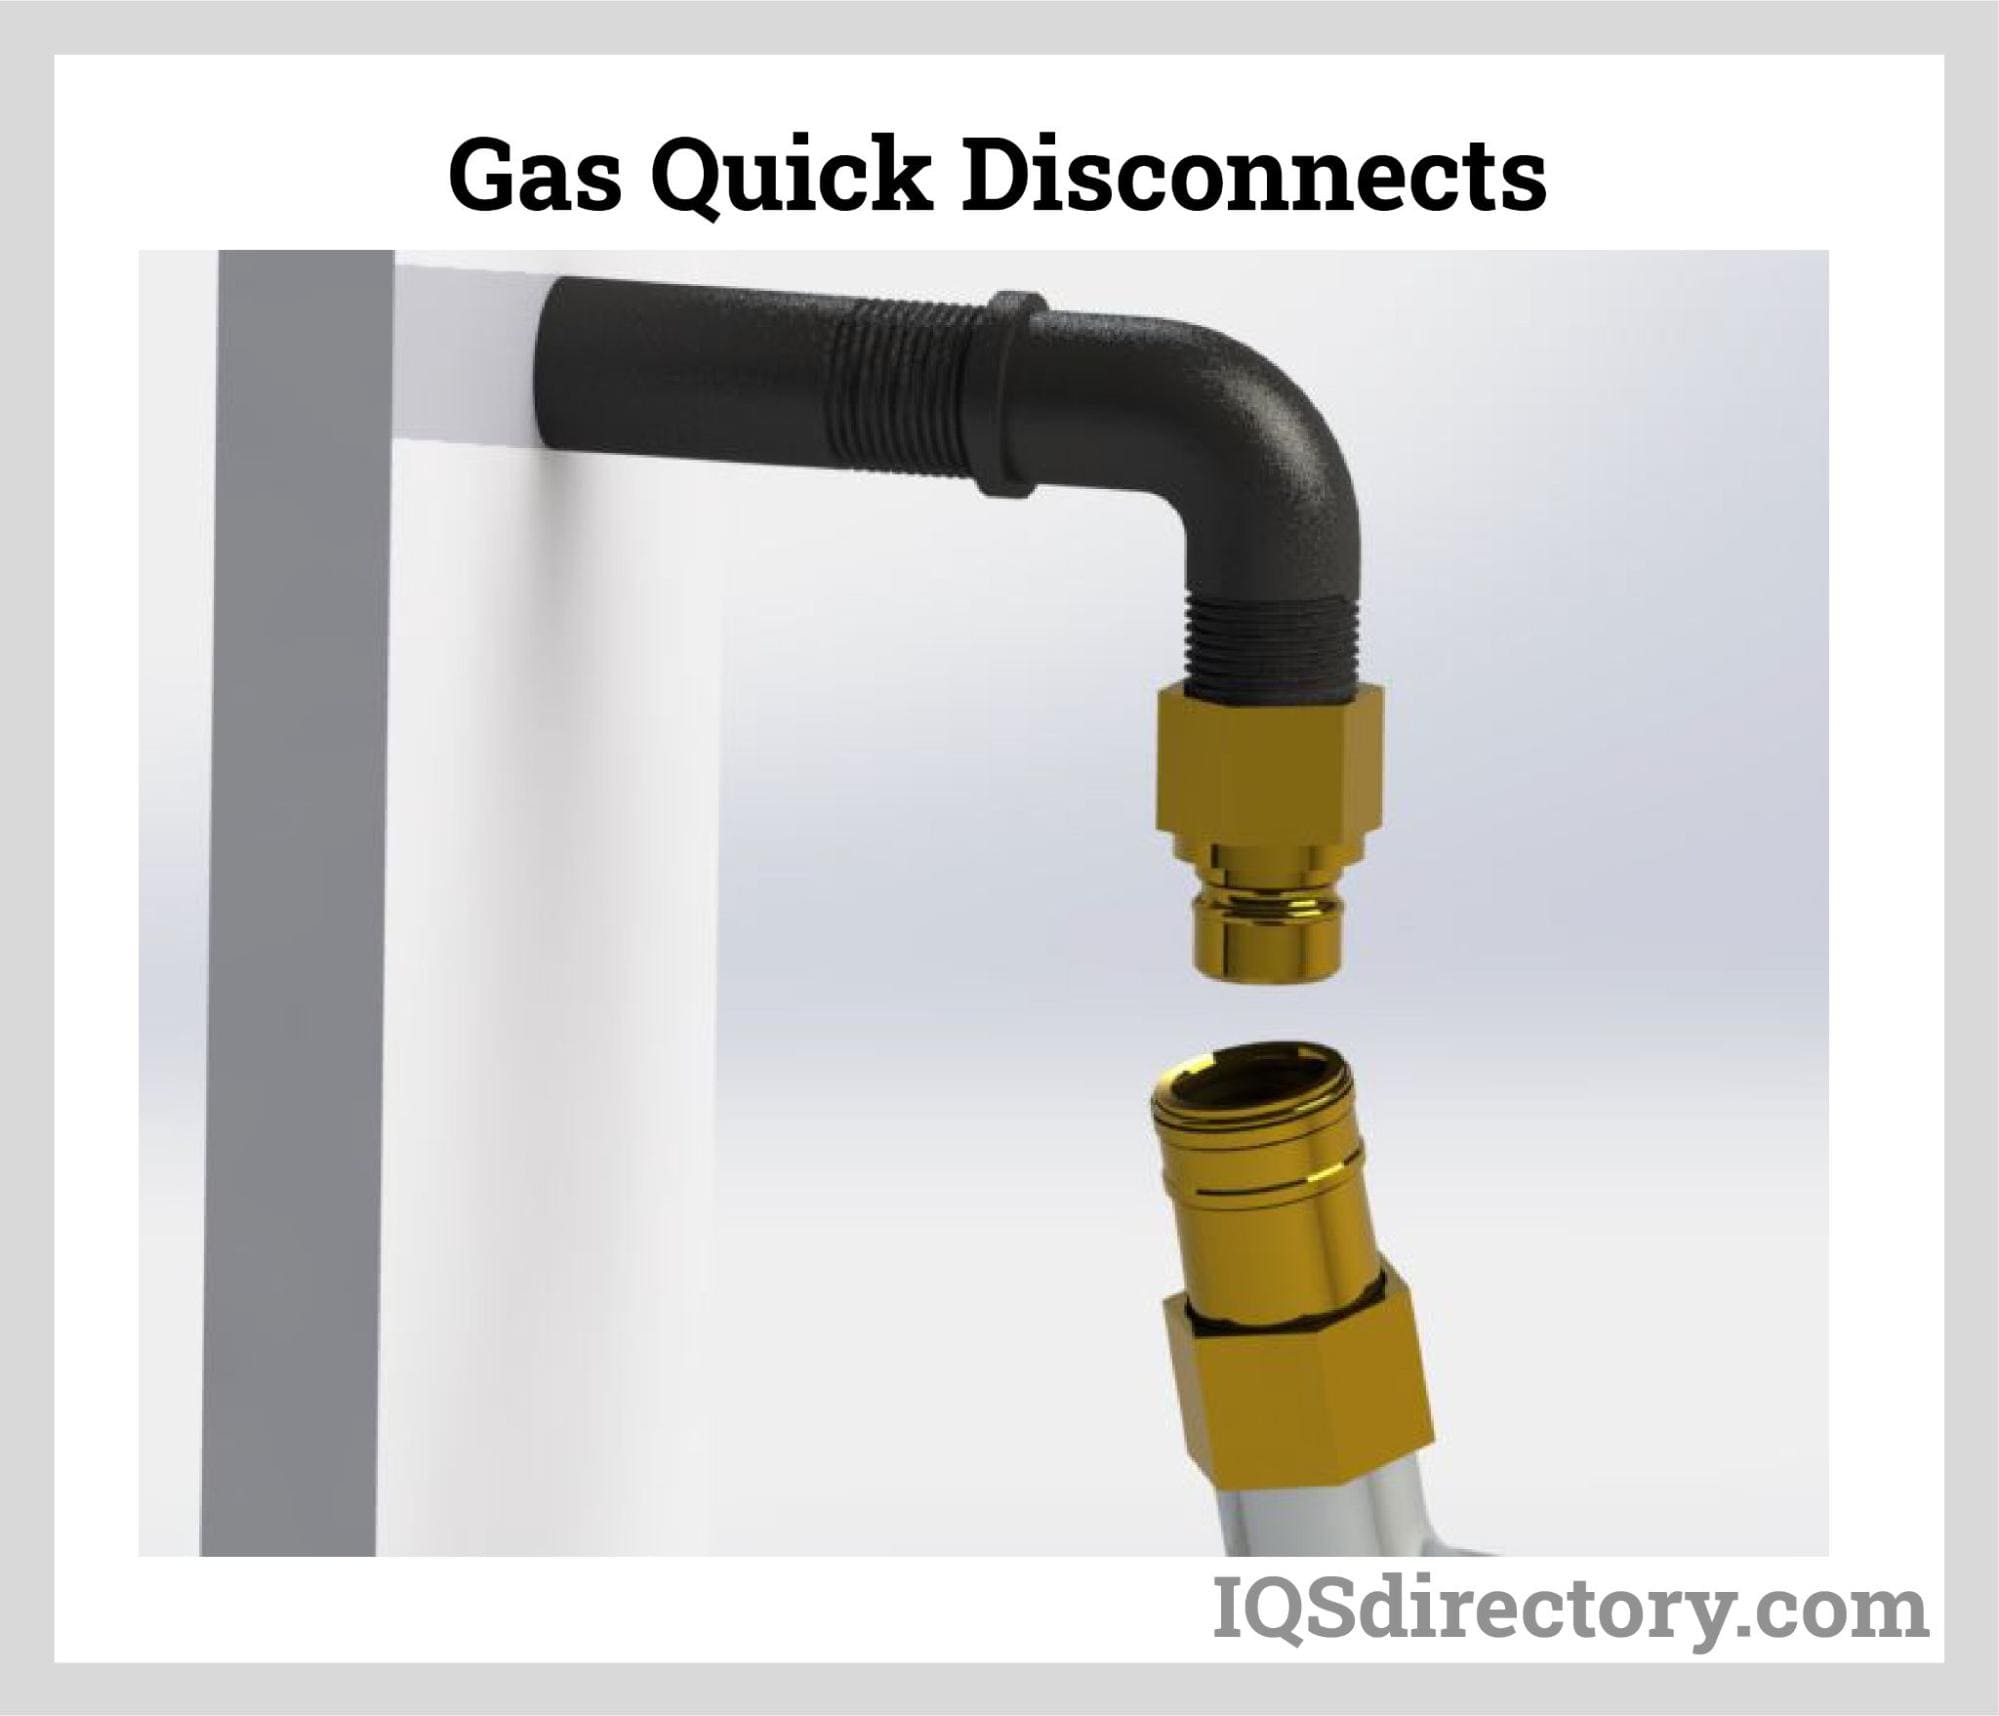 Gas Quick Disconnects